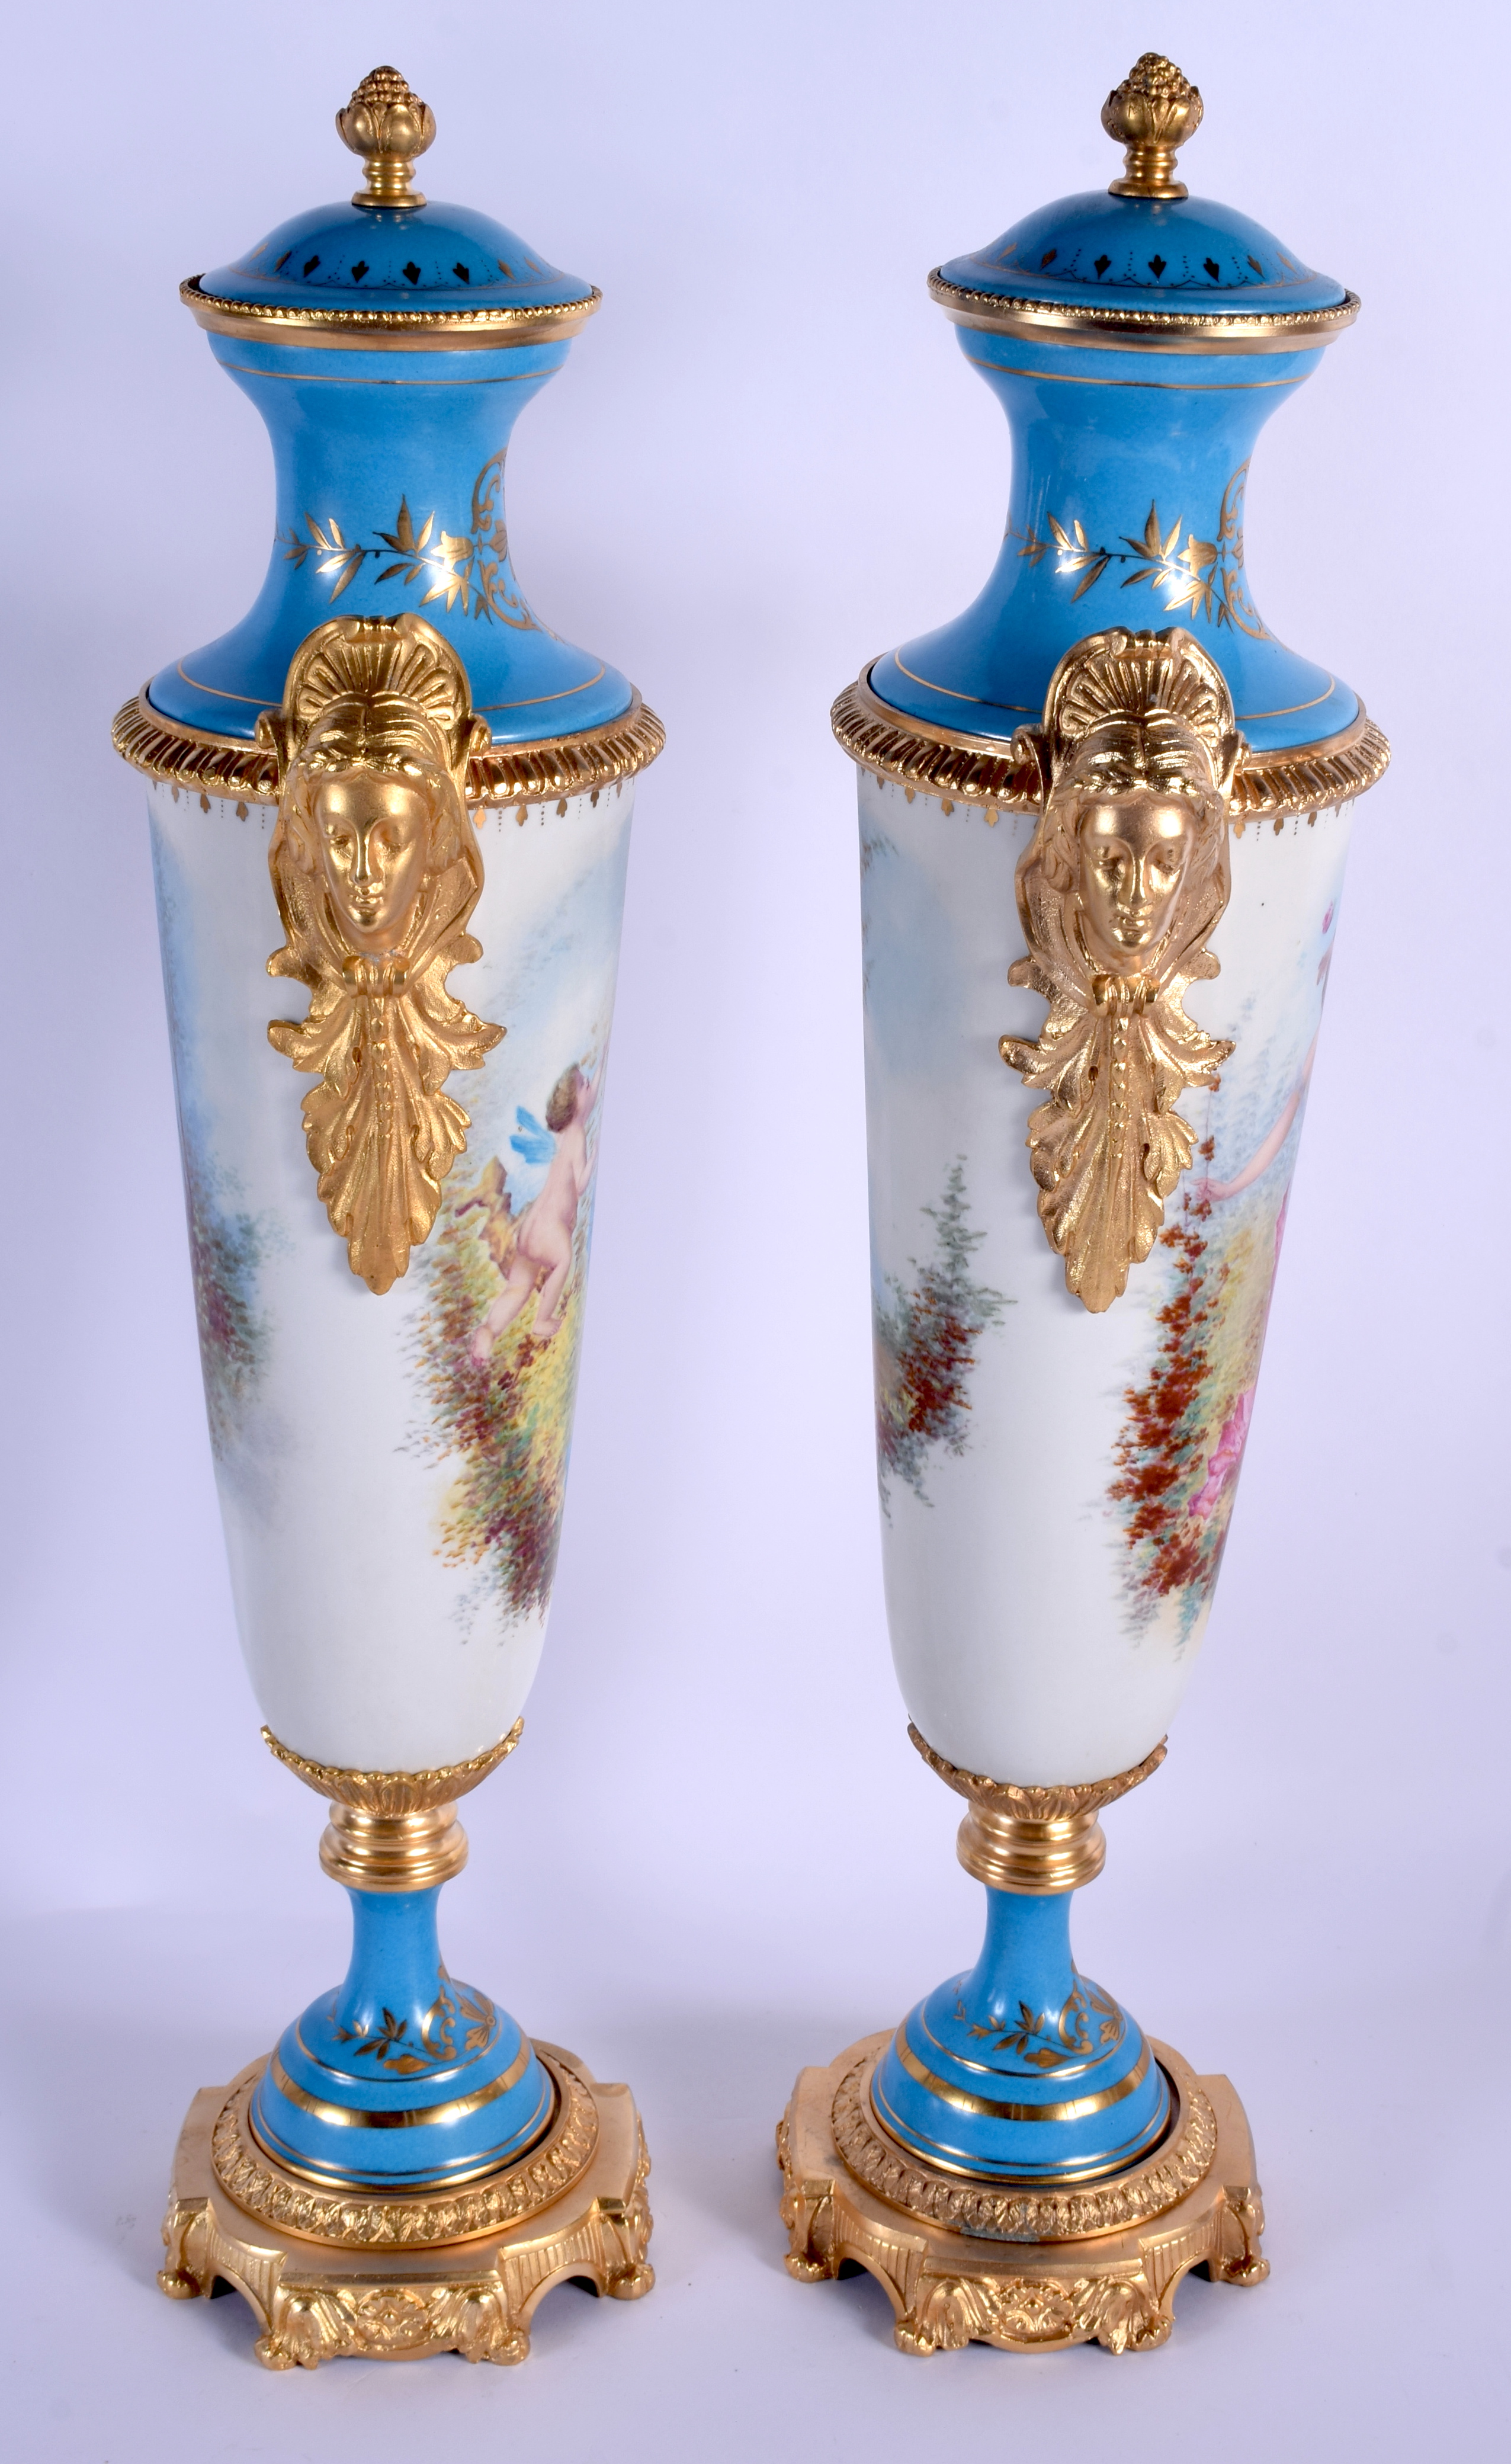 A LARGE PAIR OF CONTINENTAL SEVRES STYLE PORCELAIN VASES AND COVERS painted with figures within land - Image 4 of 5